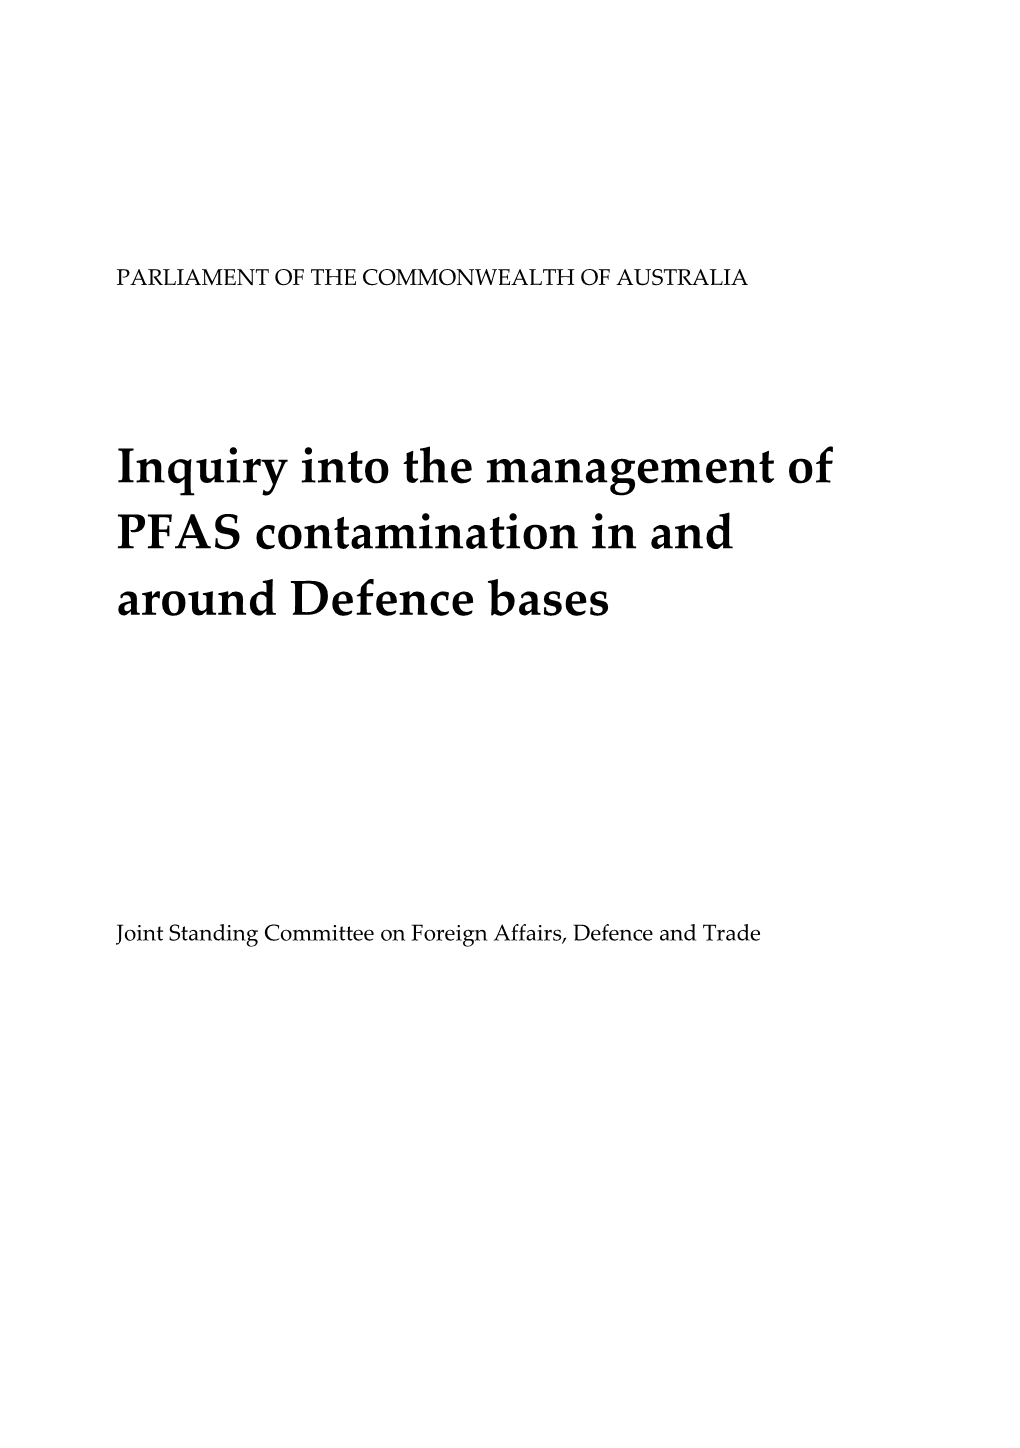 Inquiry Into the Management of PFAS Contamination in and Around Defence Bases